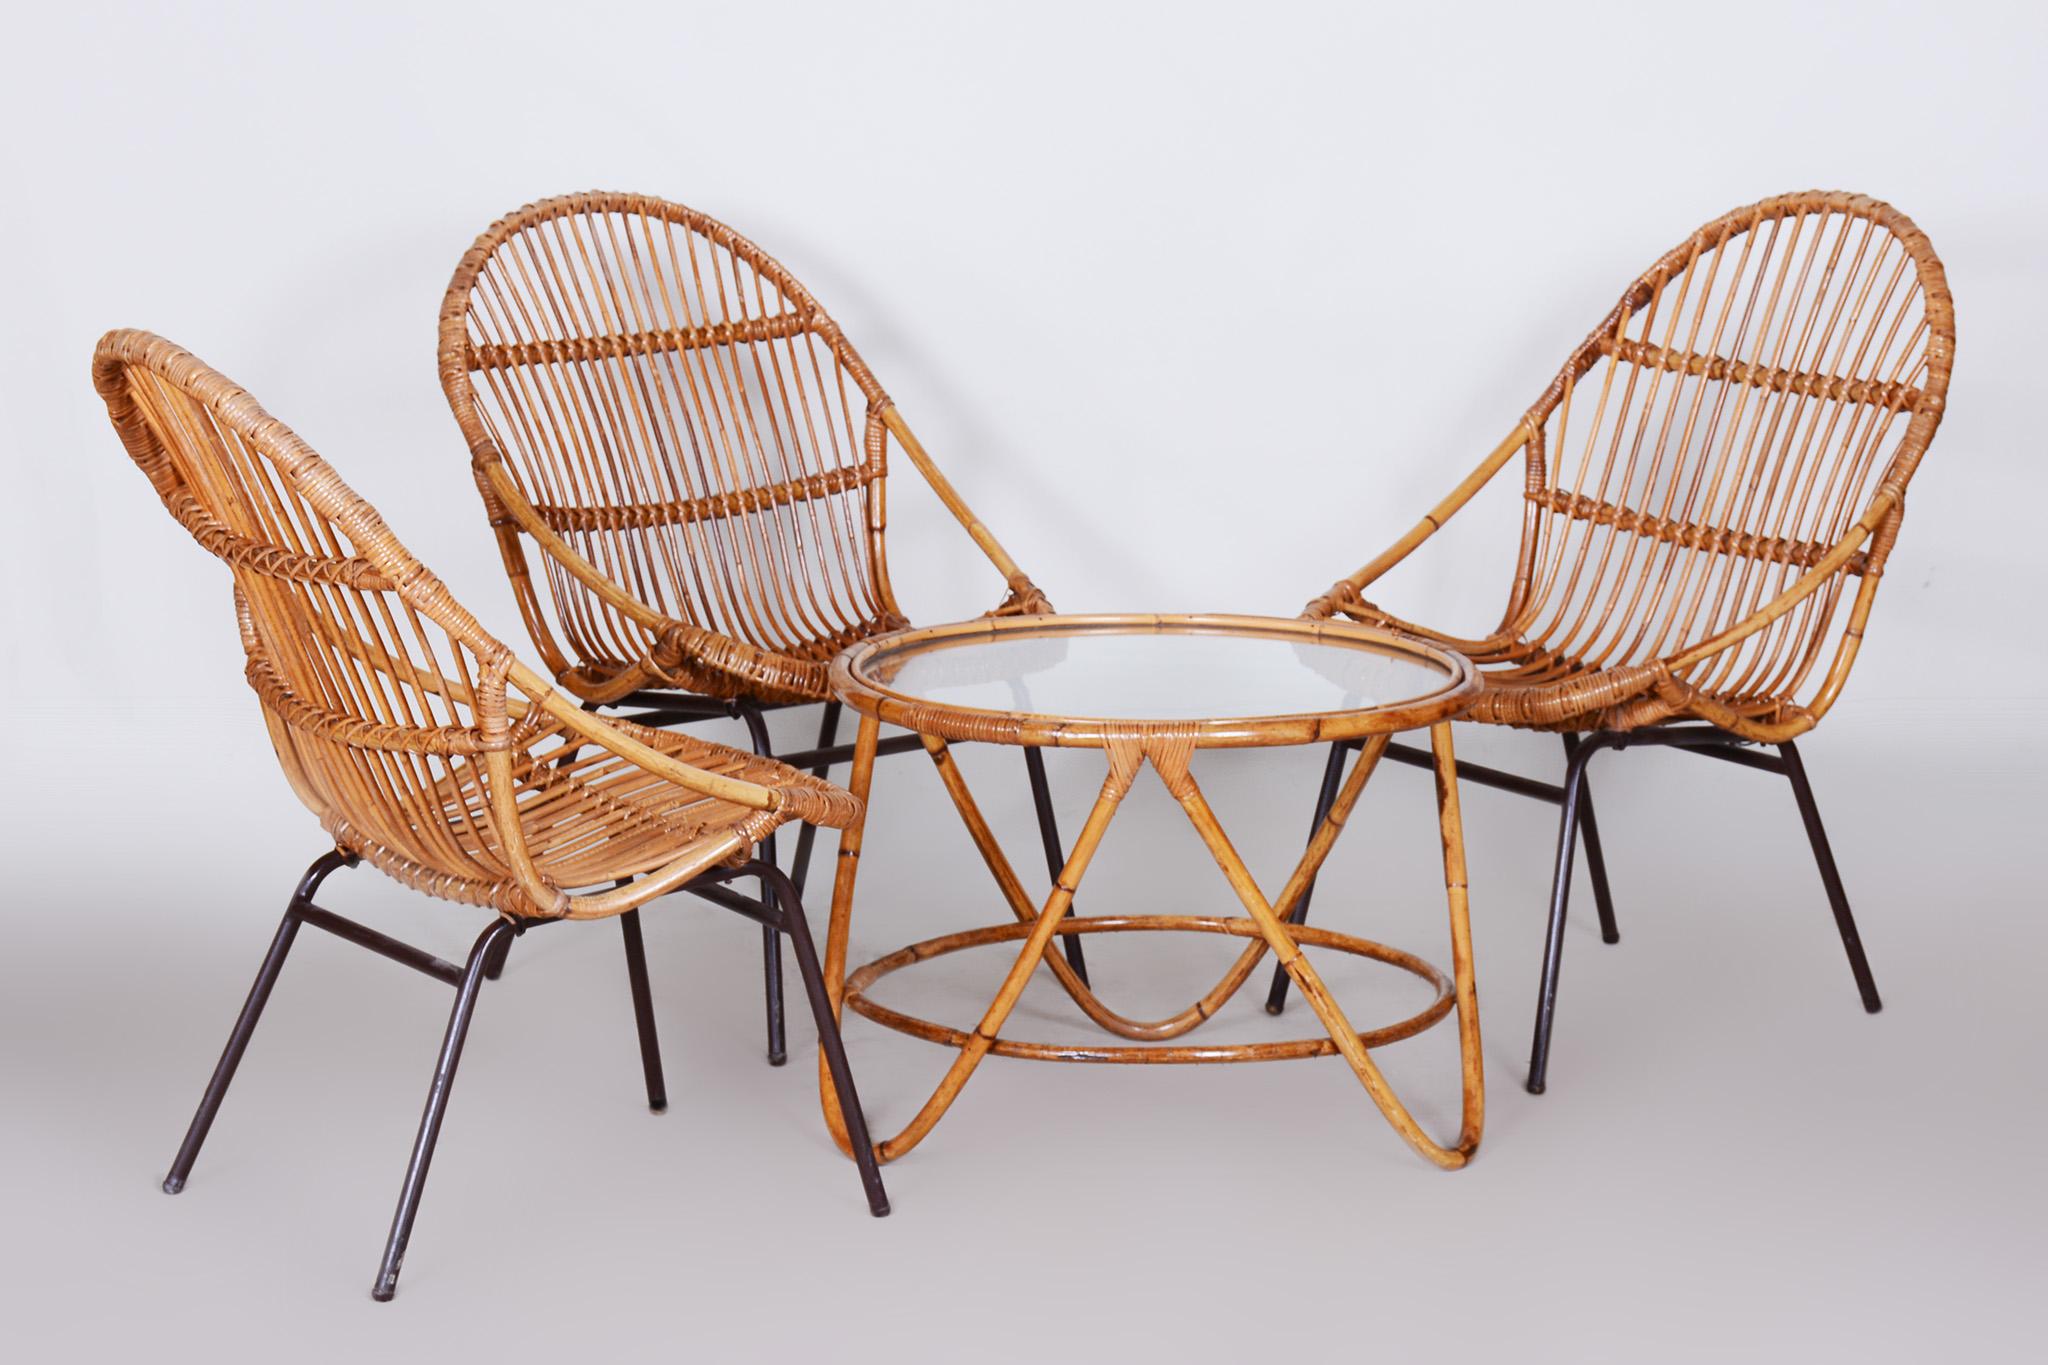 Art Deco Rattan seating set designed by Alna Fuchs.

Set of three chairs and a small table.
Perfect original condition.

Period: 1940-1949
Material: Rattan, glass, tubular steel
Source: Czechia

Chair dimensions:
height: 85 cm (33.5